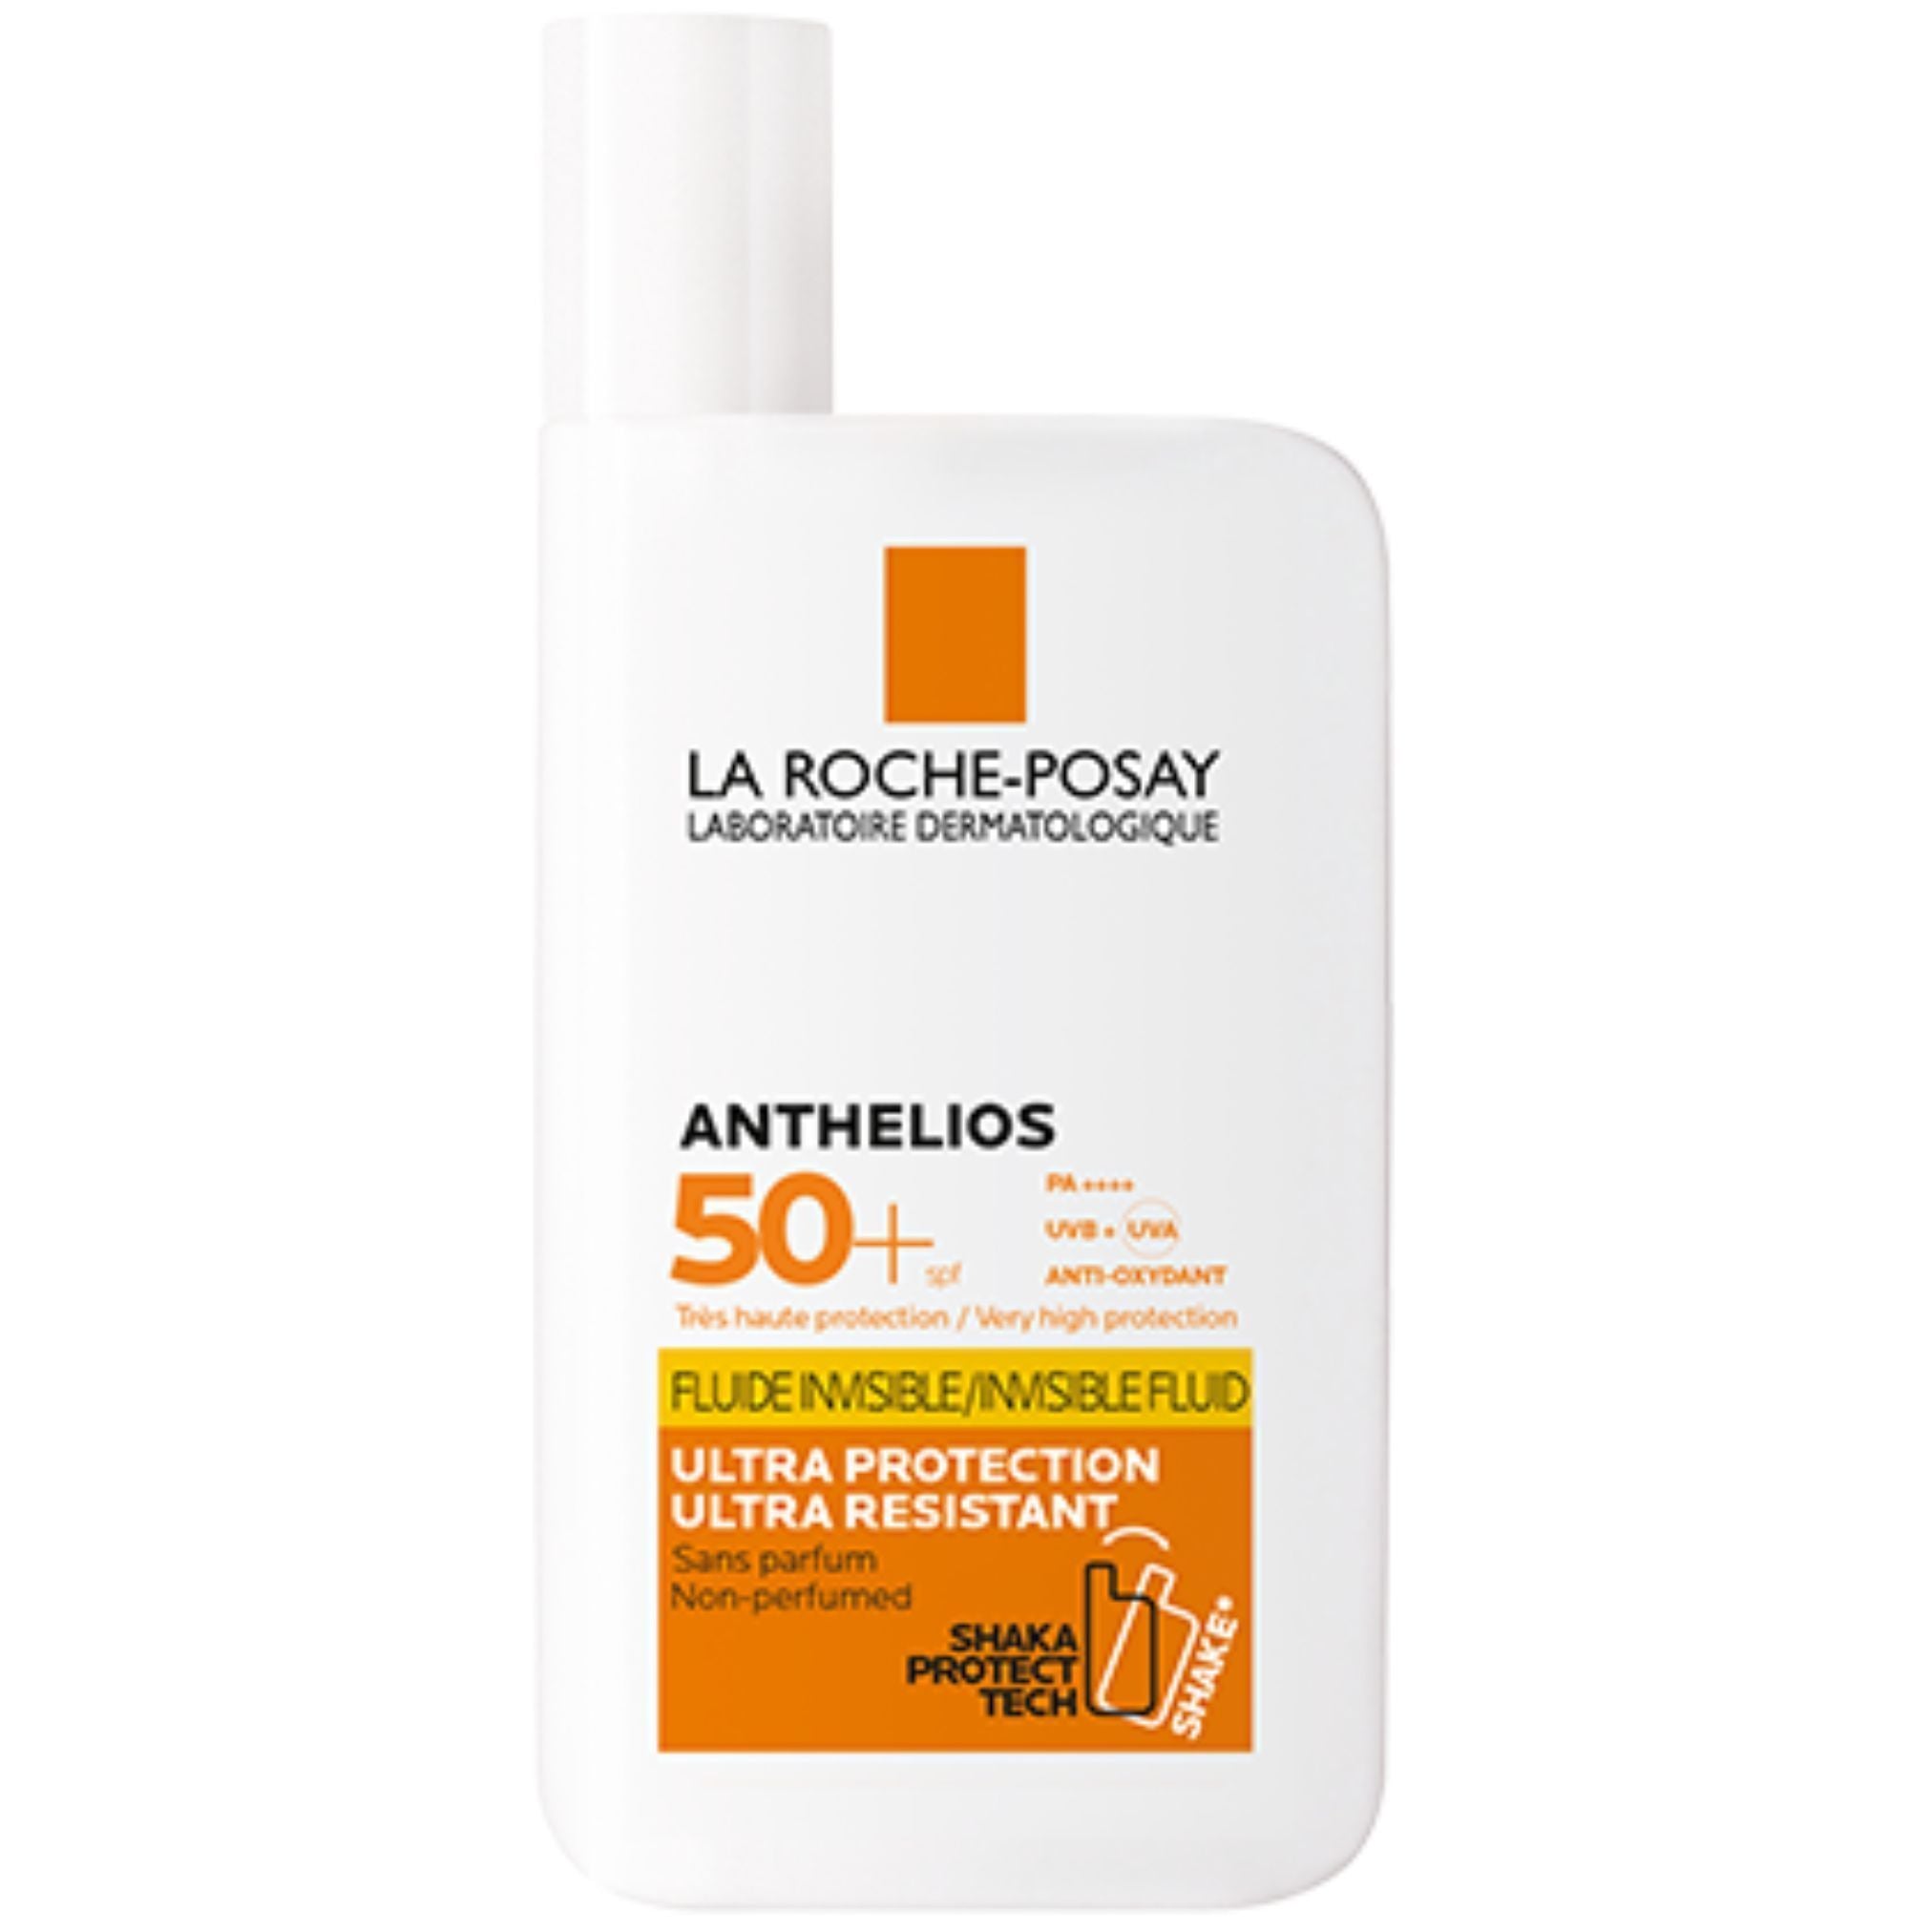 La Roche-Posay Anthelios Invisible Fluid Fragrance-Free SPF50+ 50ml